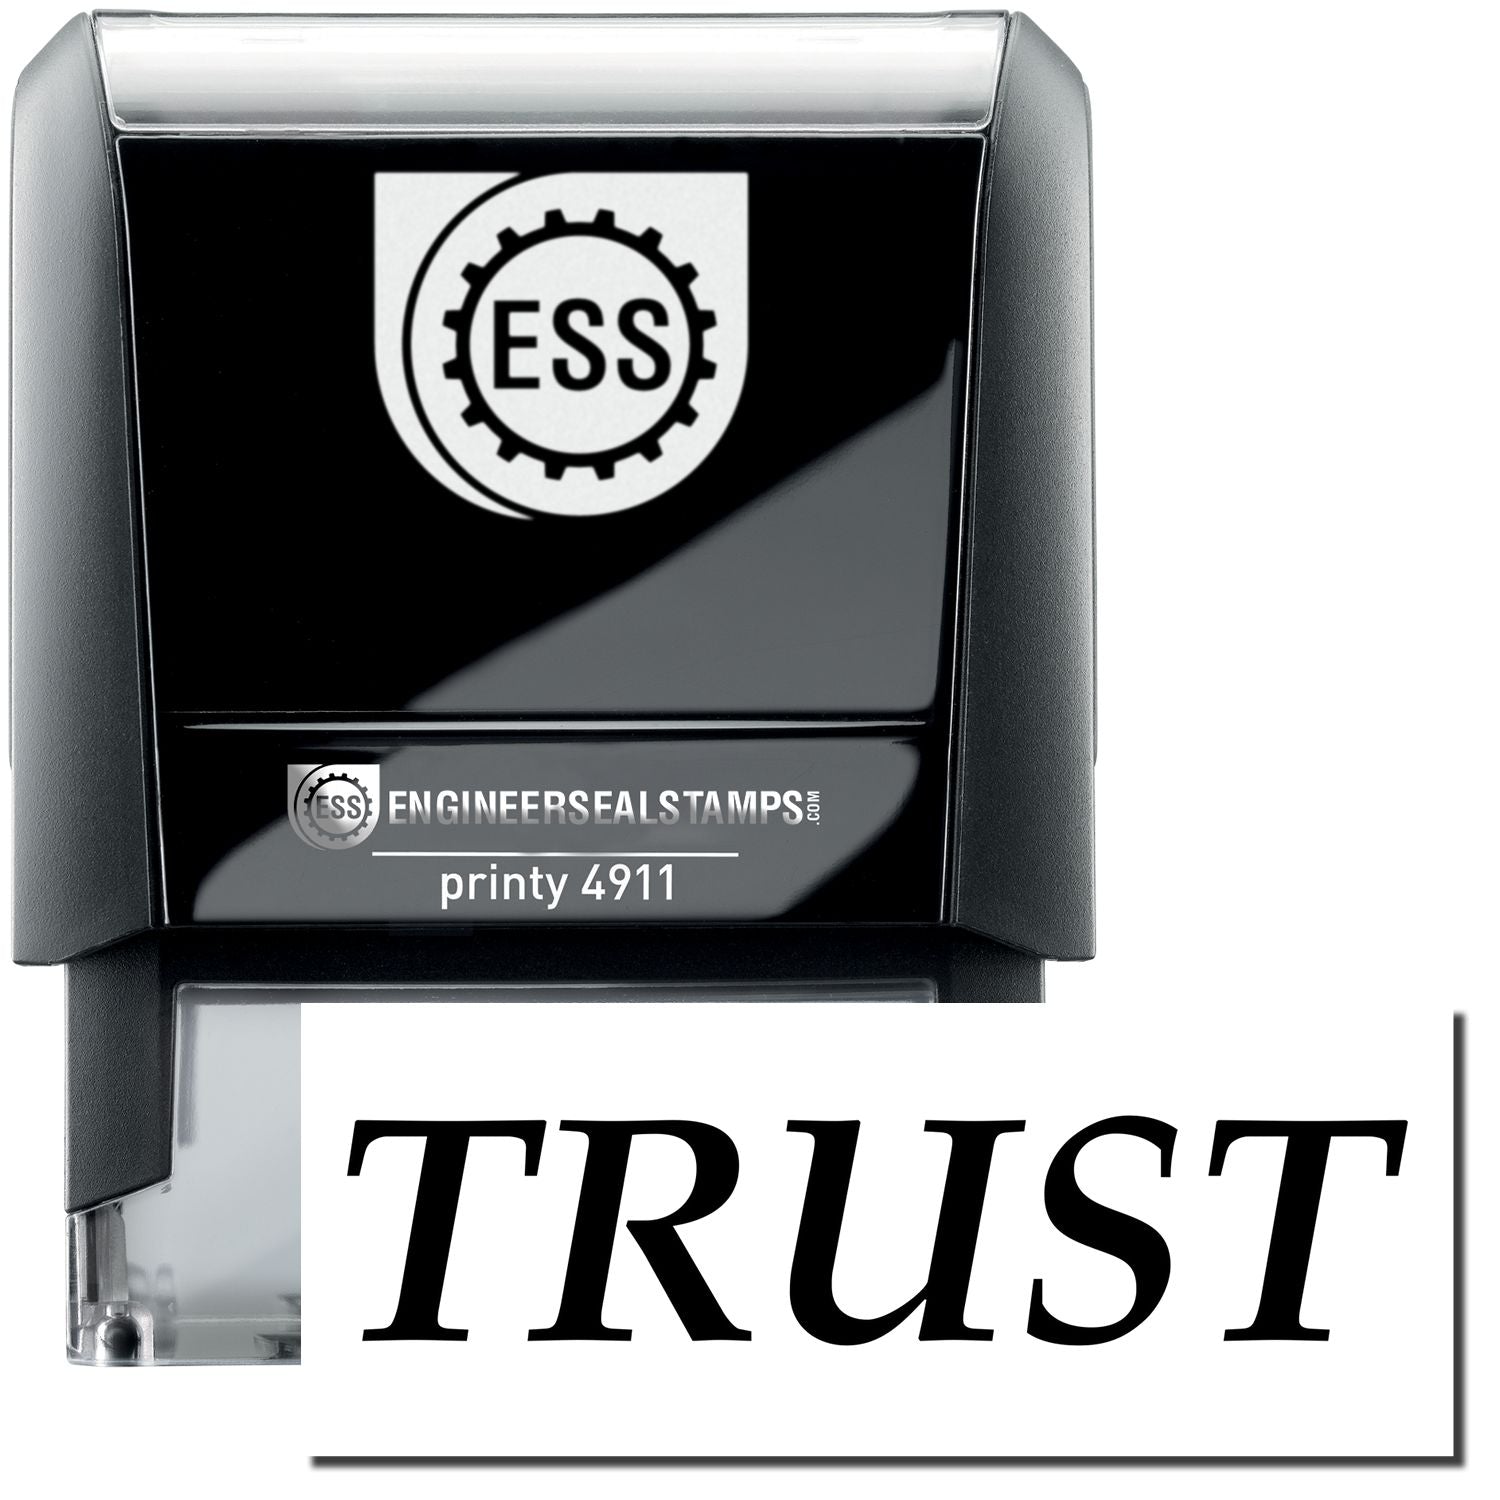 A self-inking stamp with a stamped image showing how the text "TRUST" is displayed after stamping.